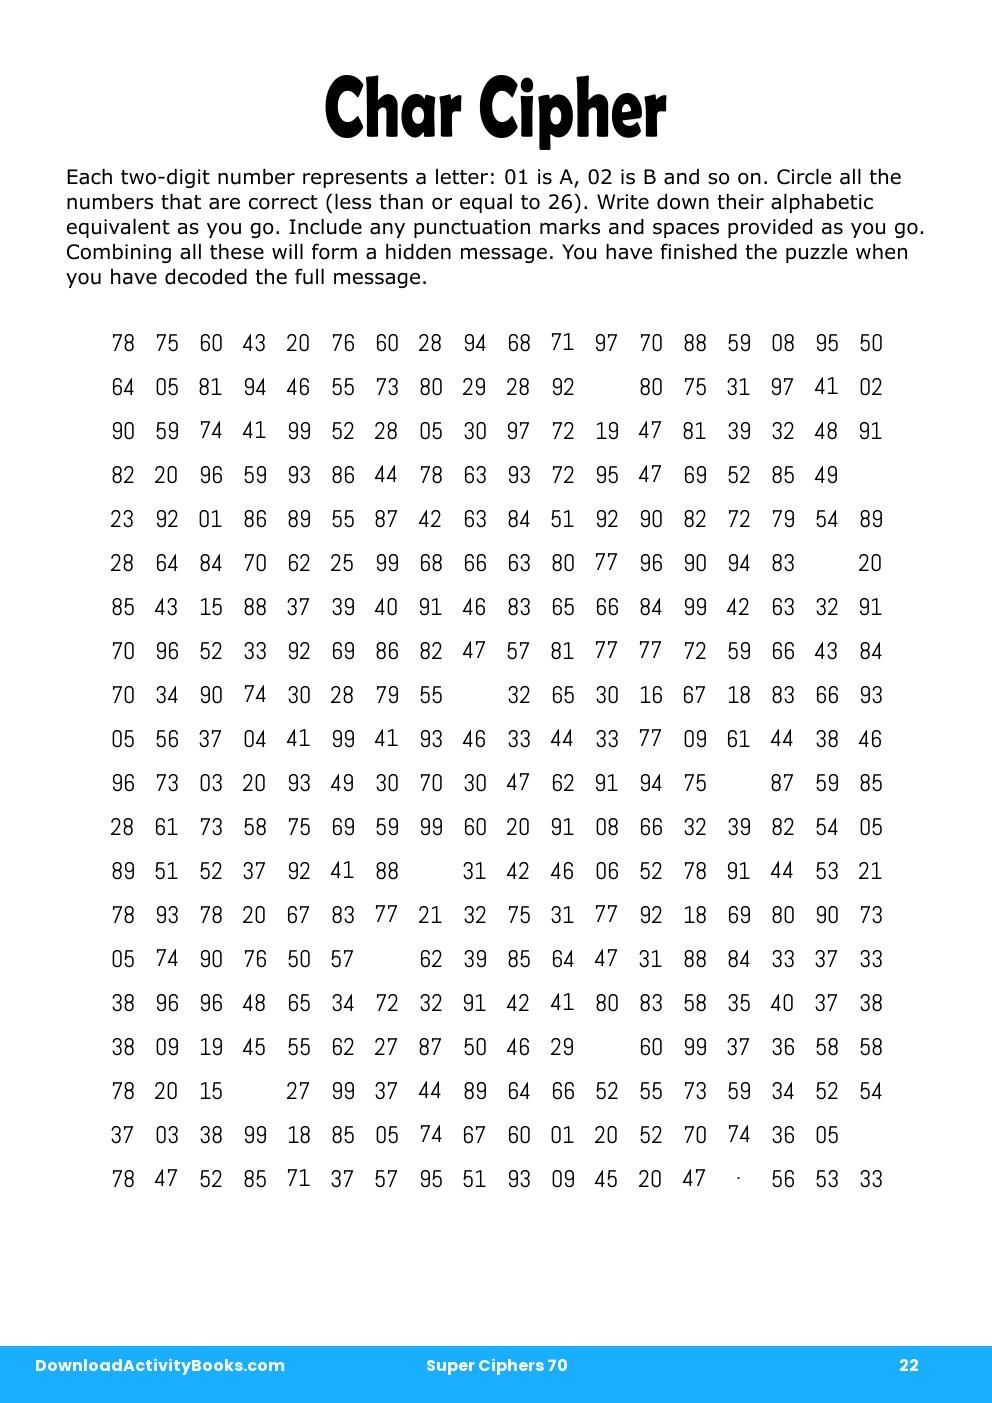 Char Cipher in Super Ciphers 70